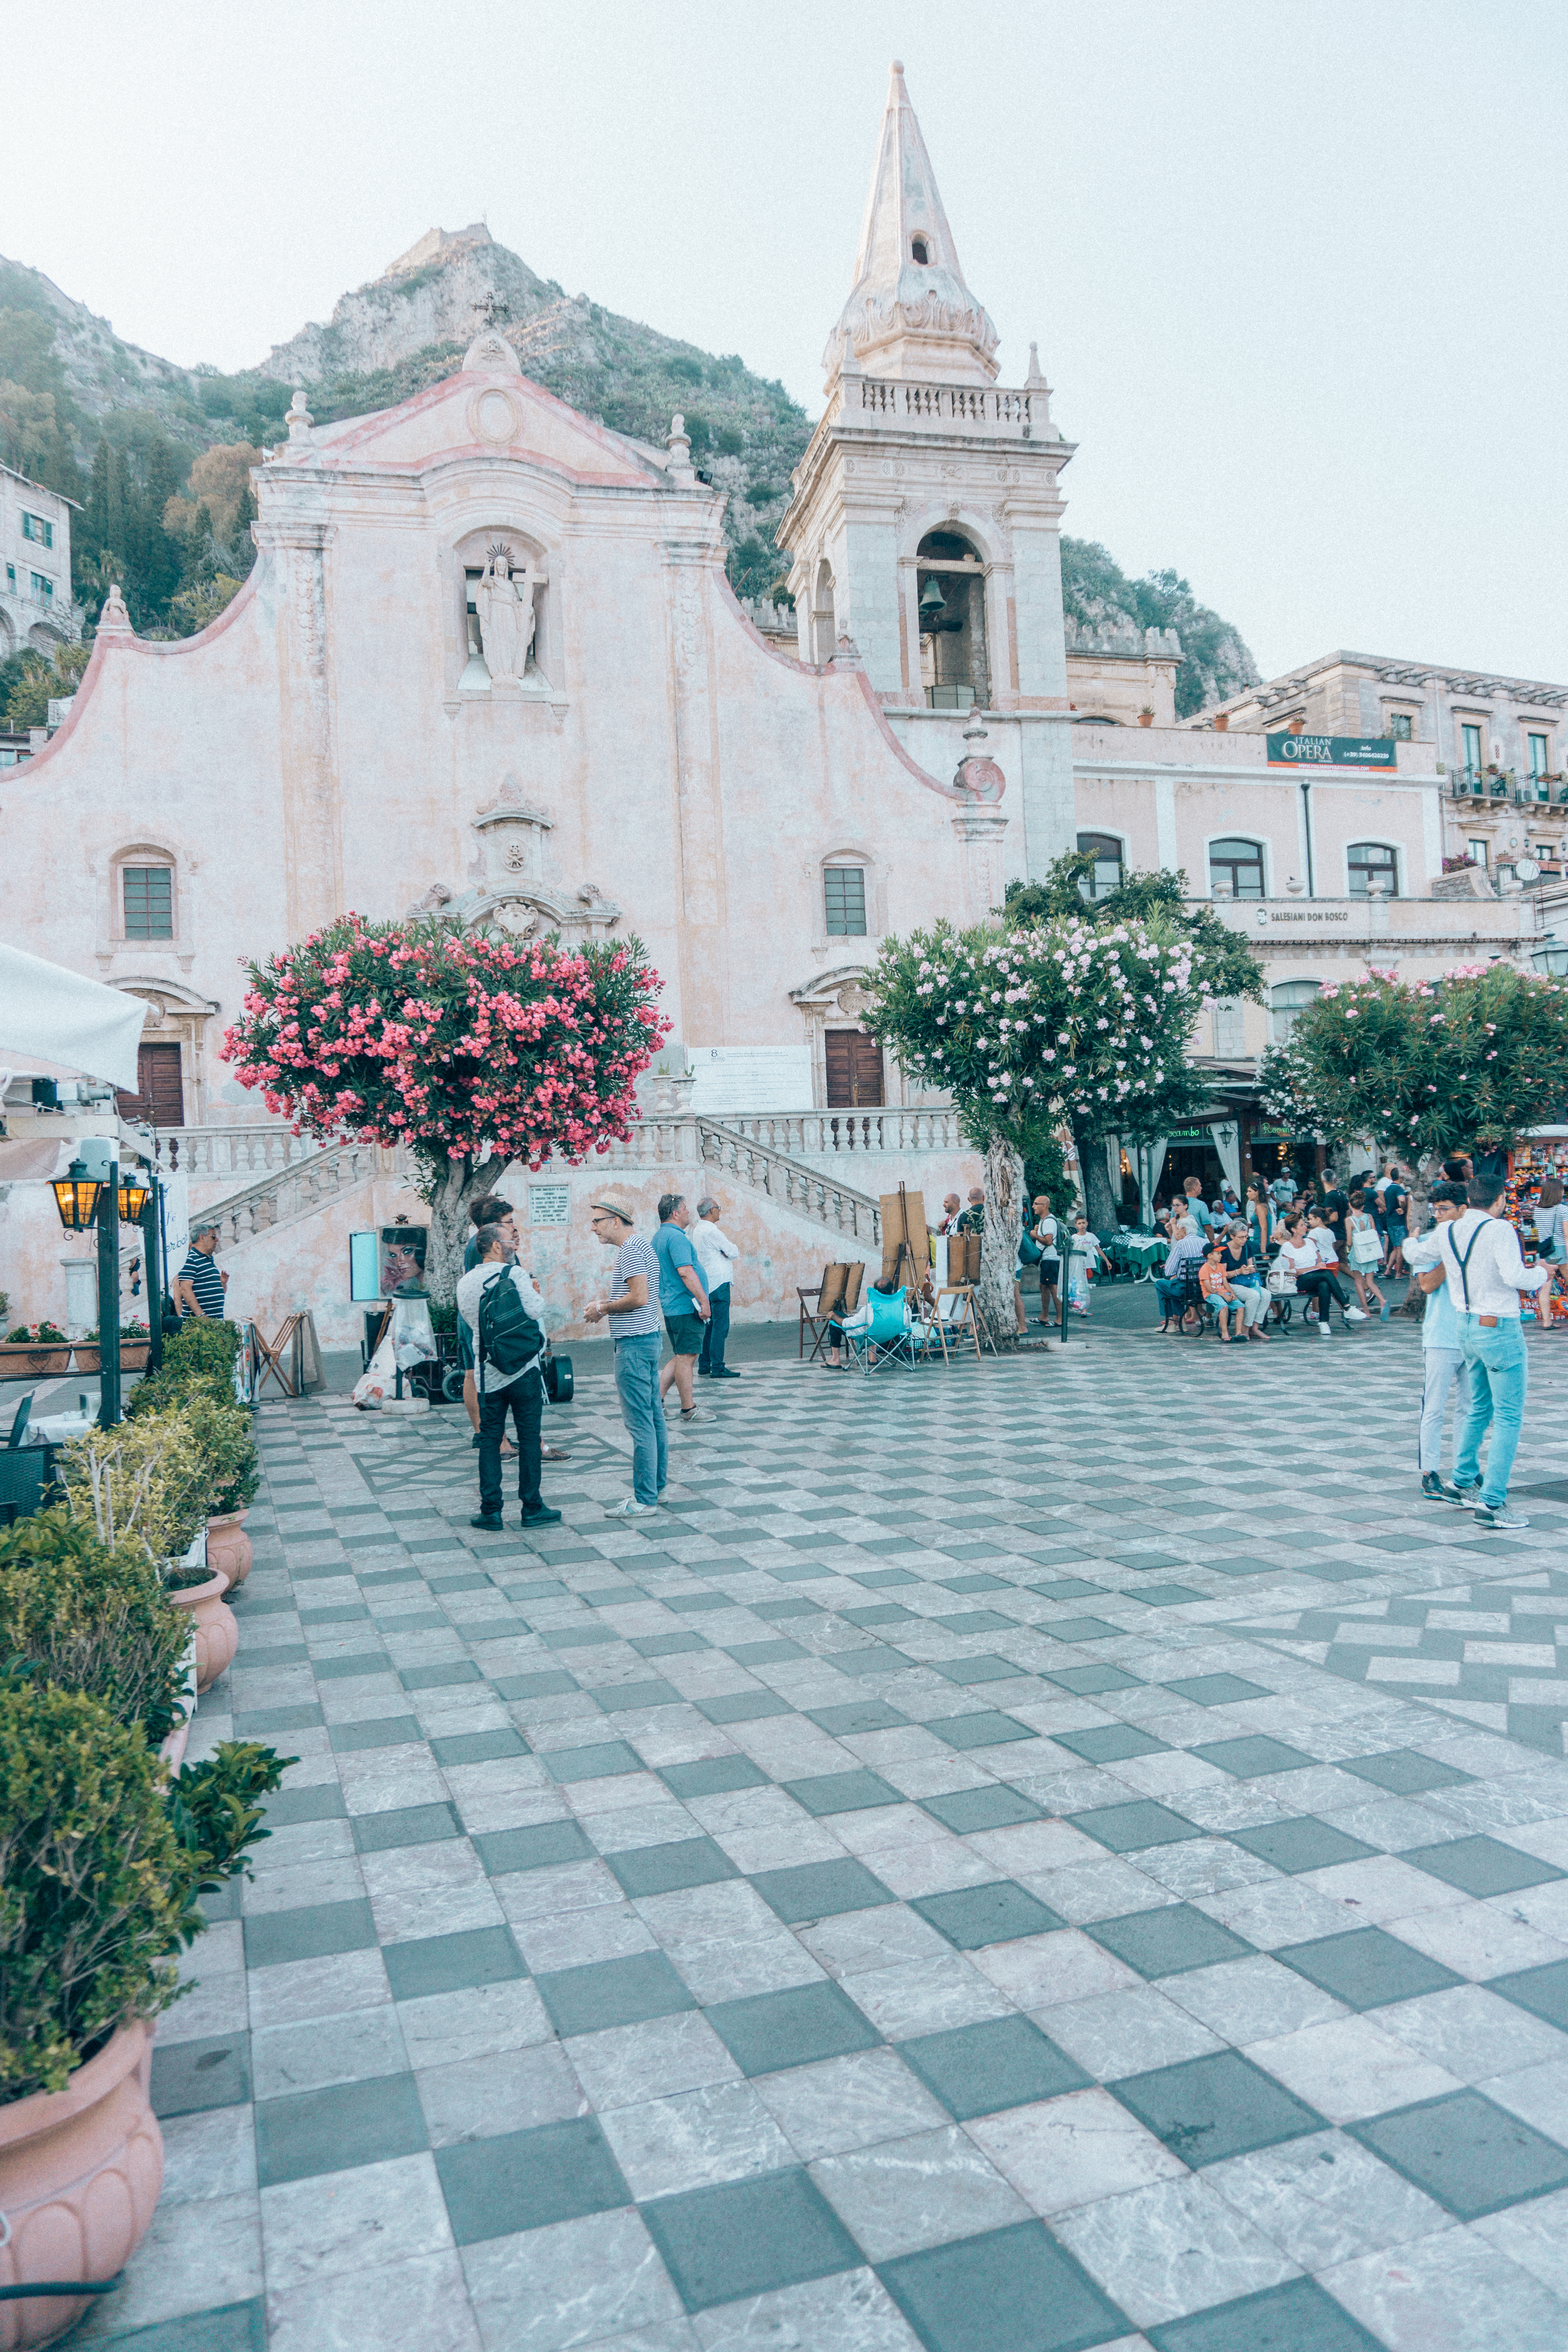 People hanging out at the cliff top square of Taormina with the pink cathedral and bell tower, along with the checkered pavement. 